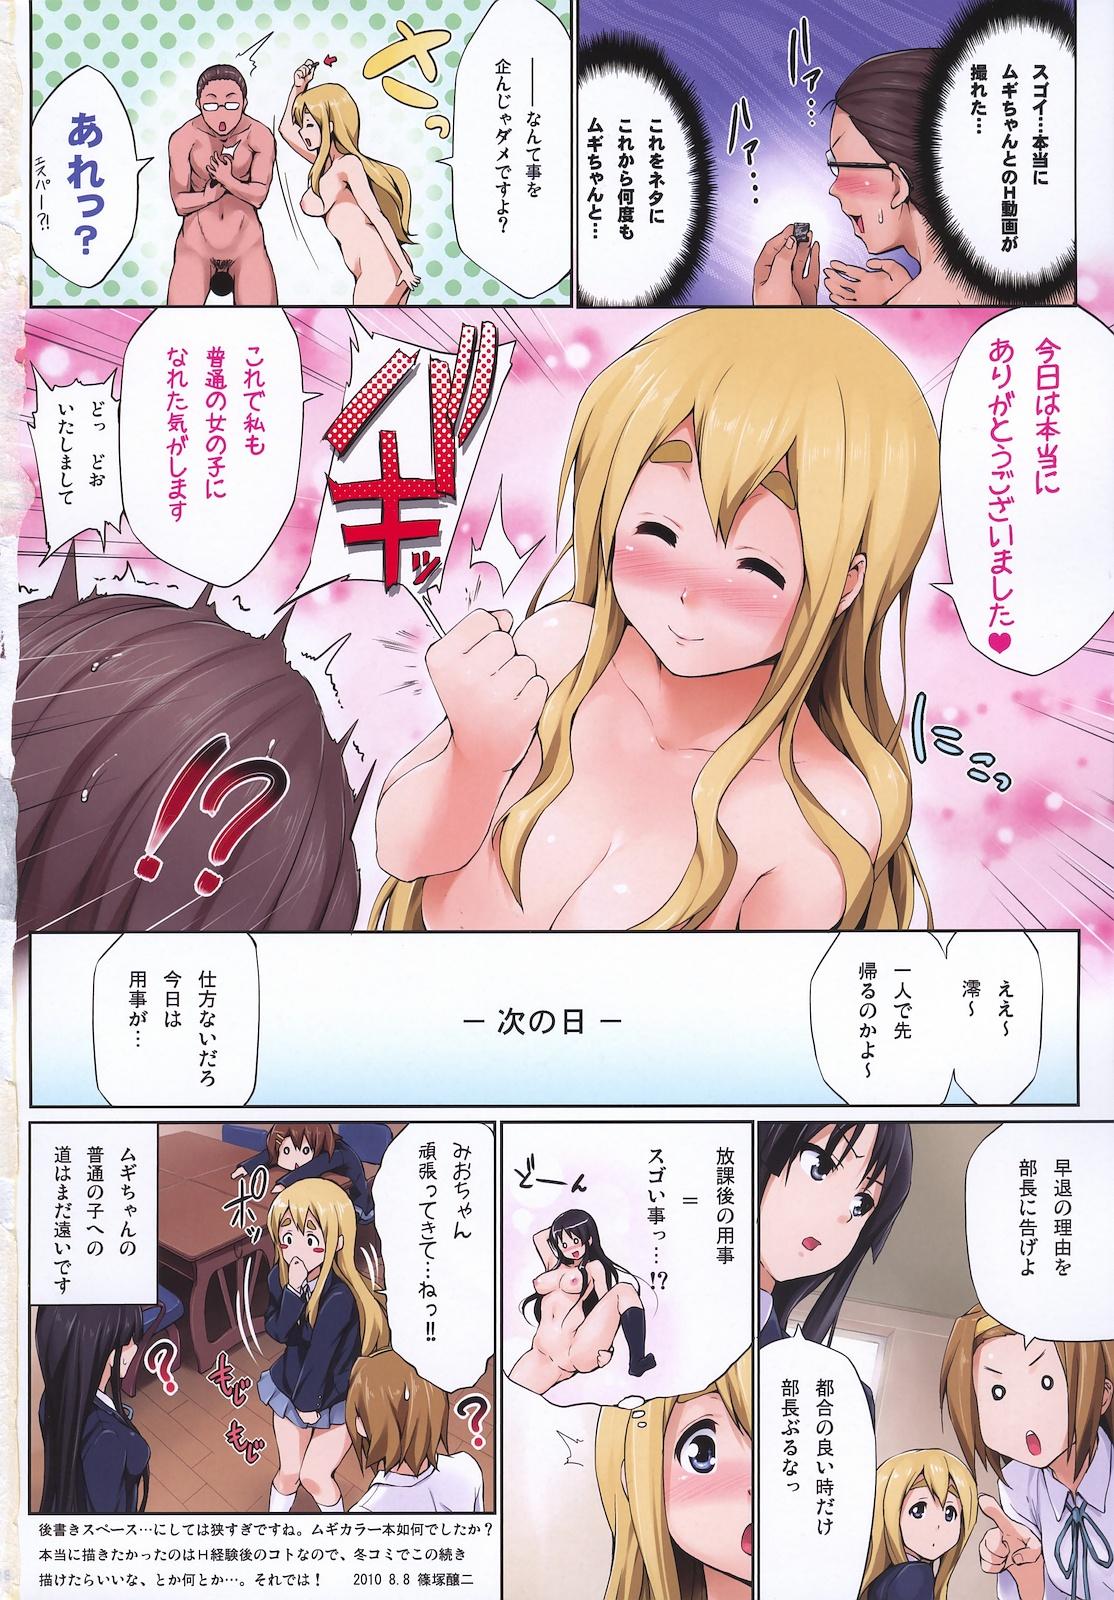 From Ura Mugi - K-on Fingers - Page 17